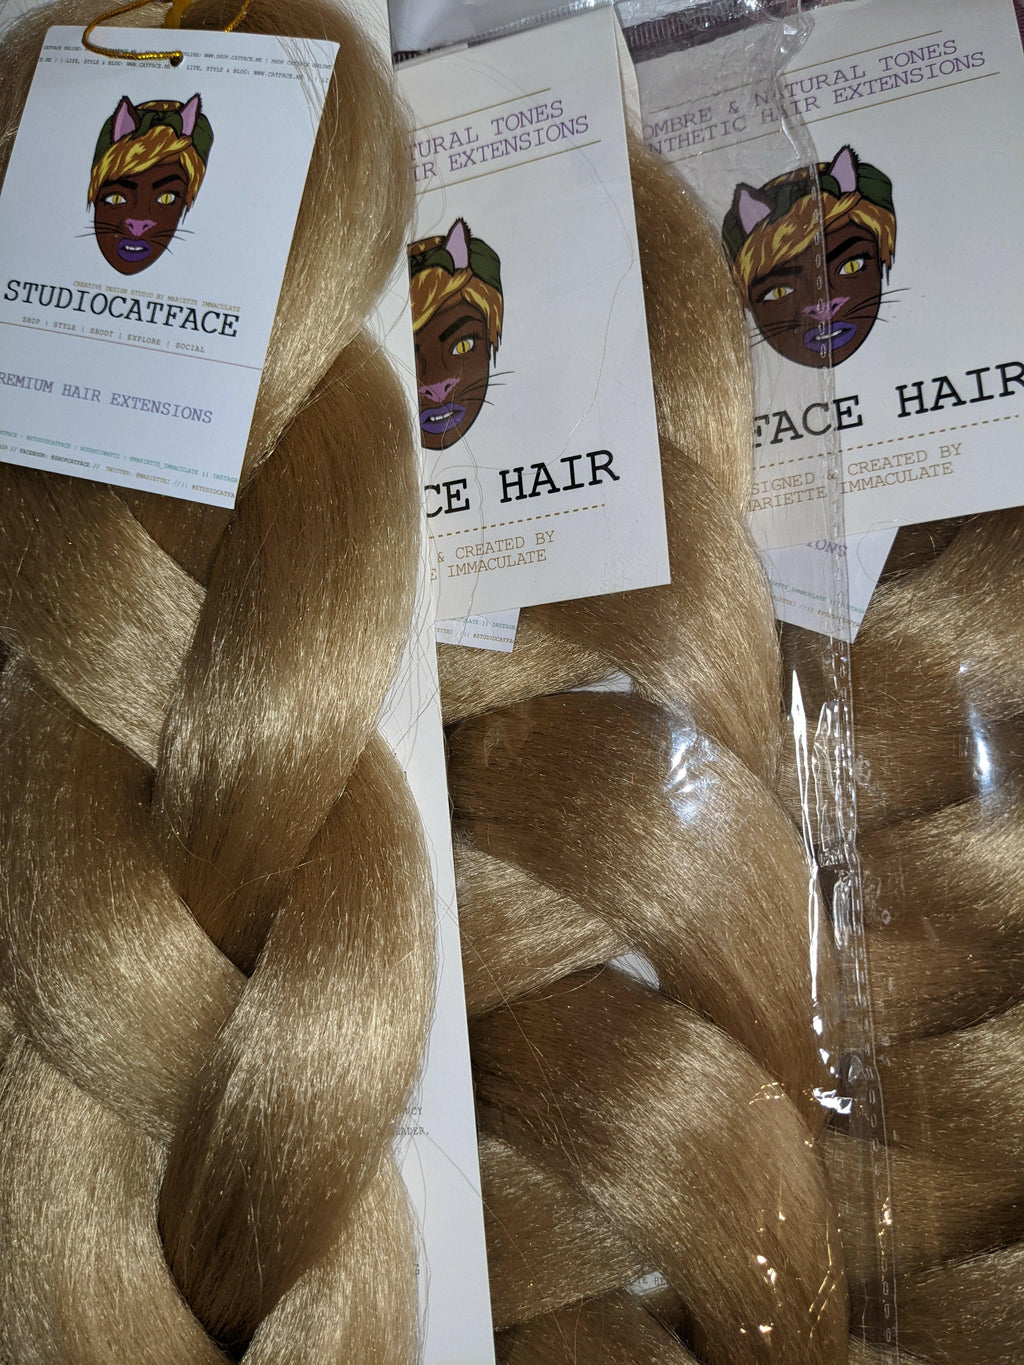 CATFACE HONEY BLONDE - ONE TONE OMBRE 34 INCHES 165g  CATFACE HAIR